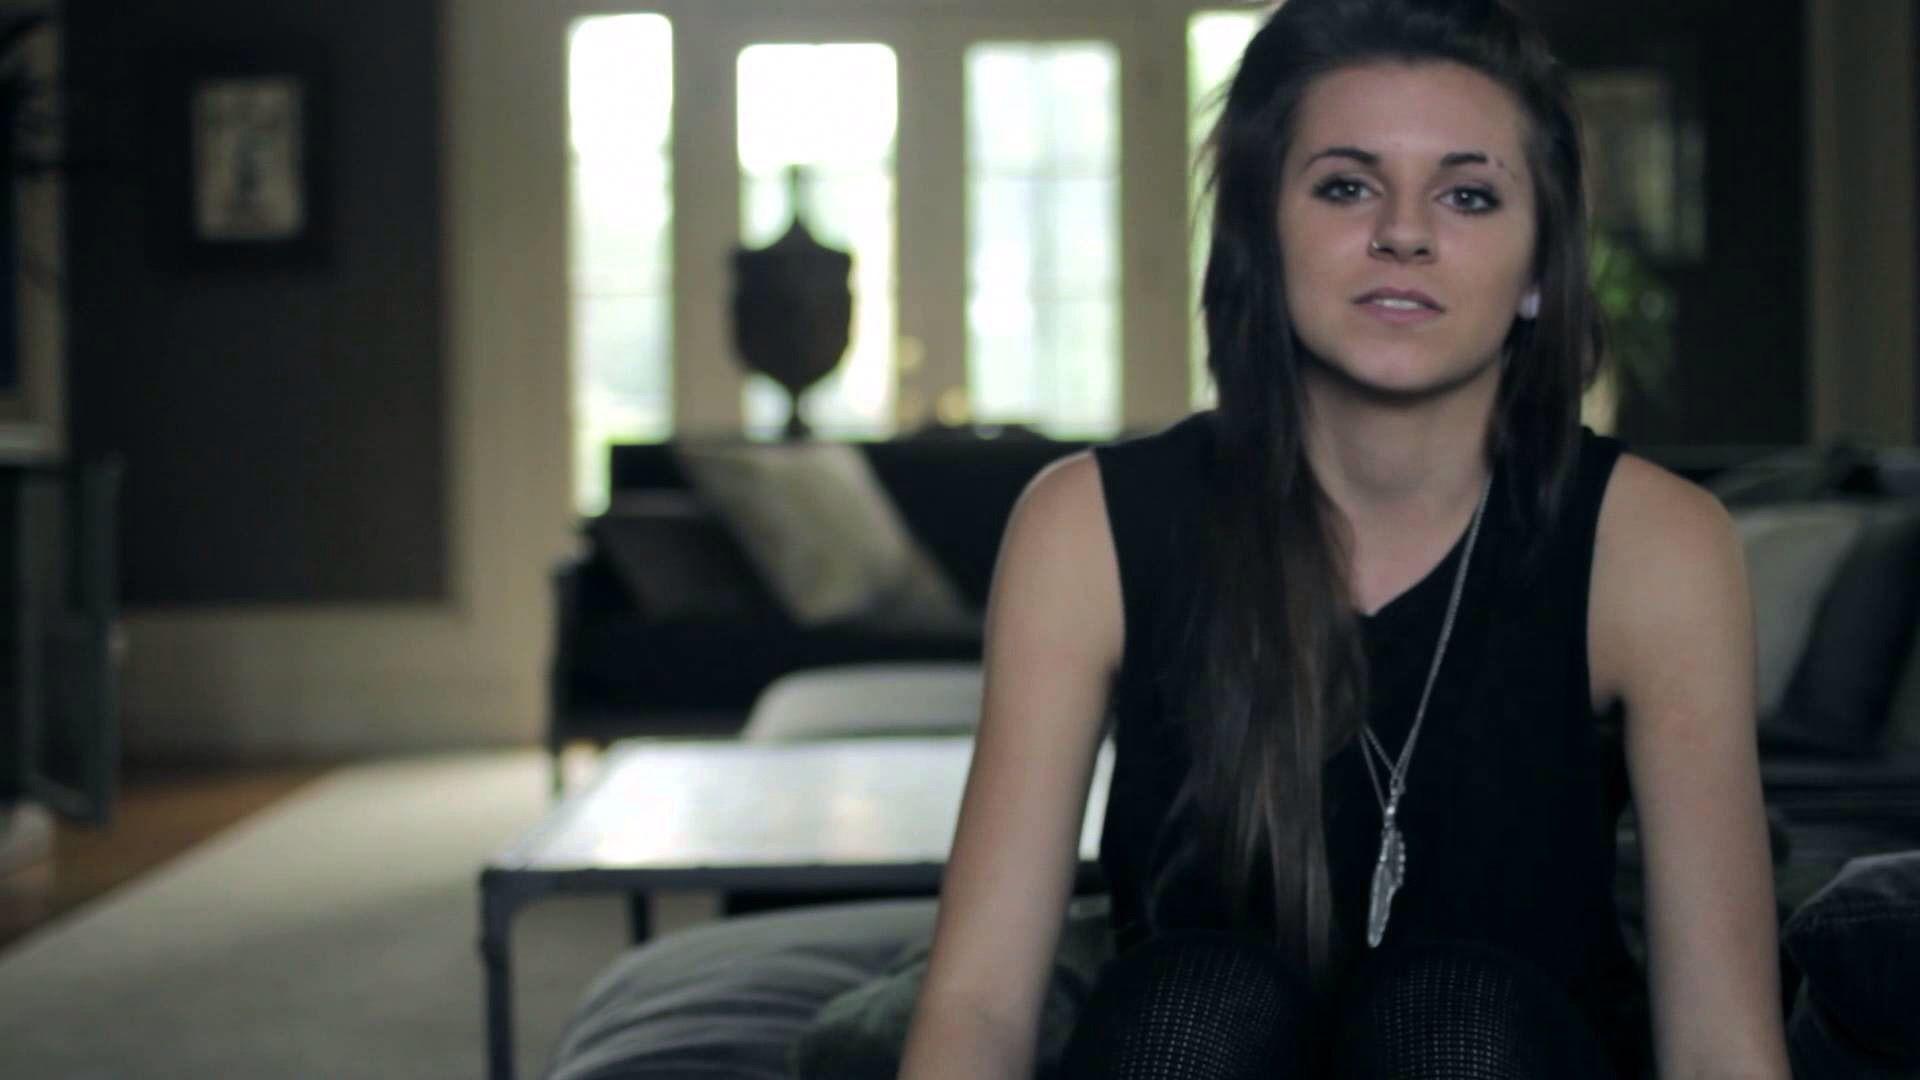 American rockers Pvris are set to light up 2015!